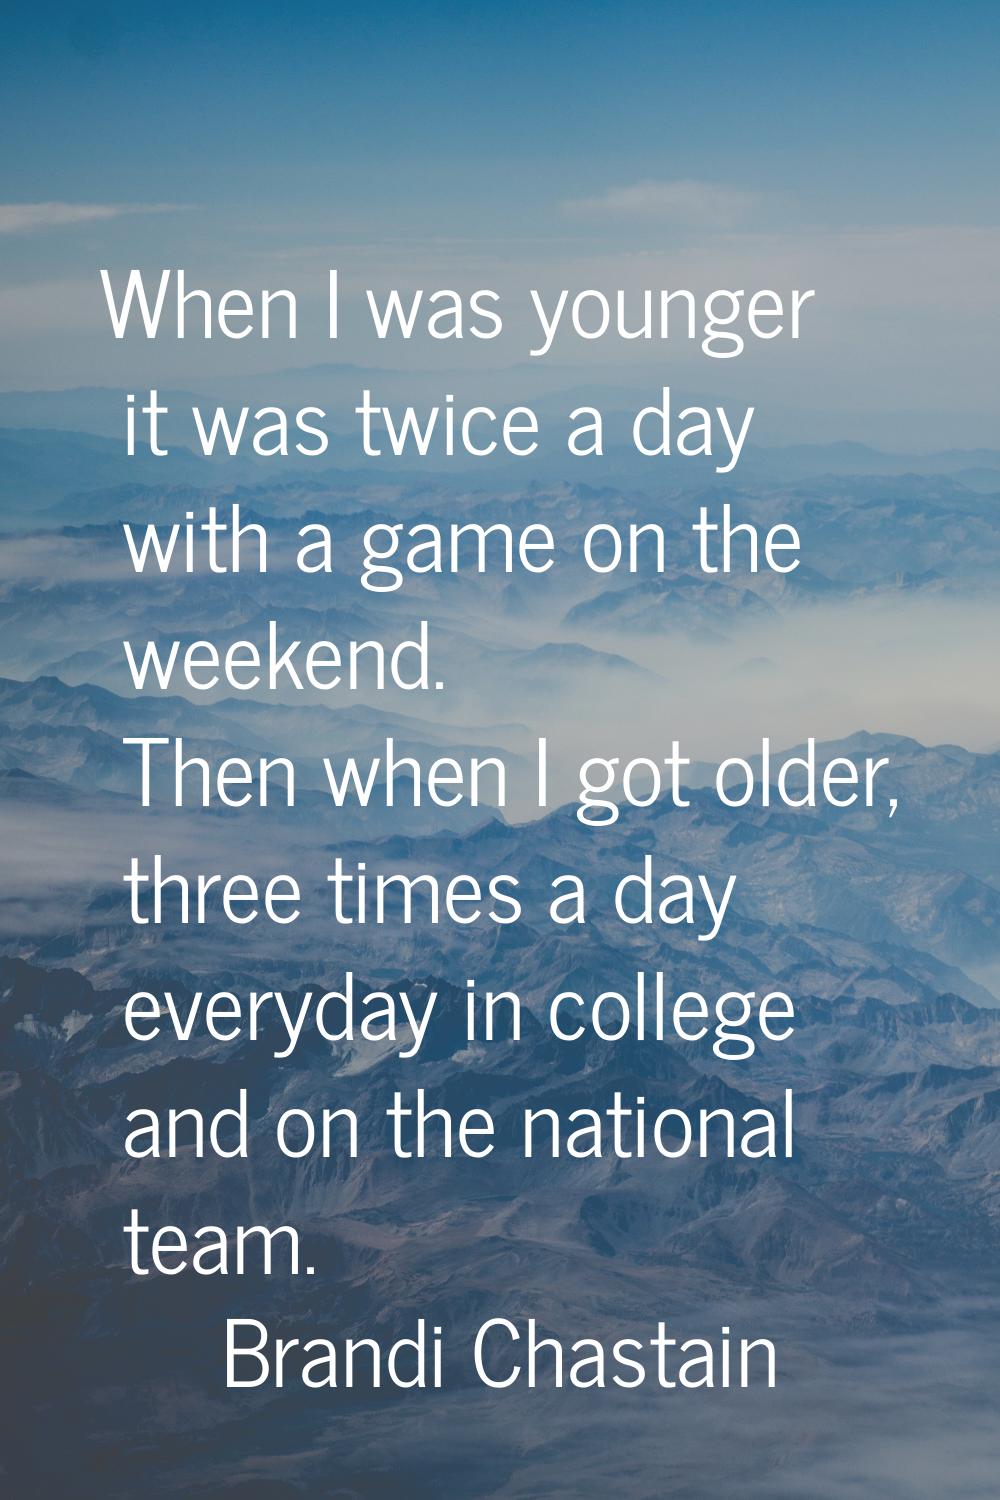 When I was younger it was twice a day with a game on the weekend. Then when I got older, three time